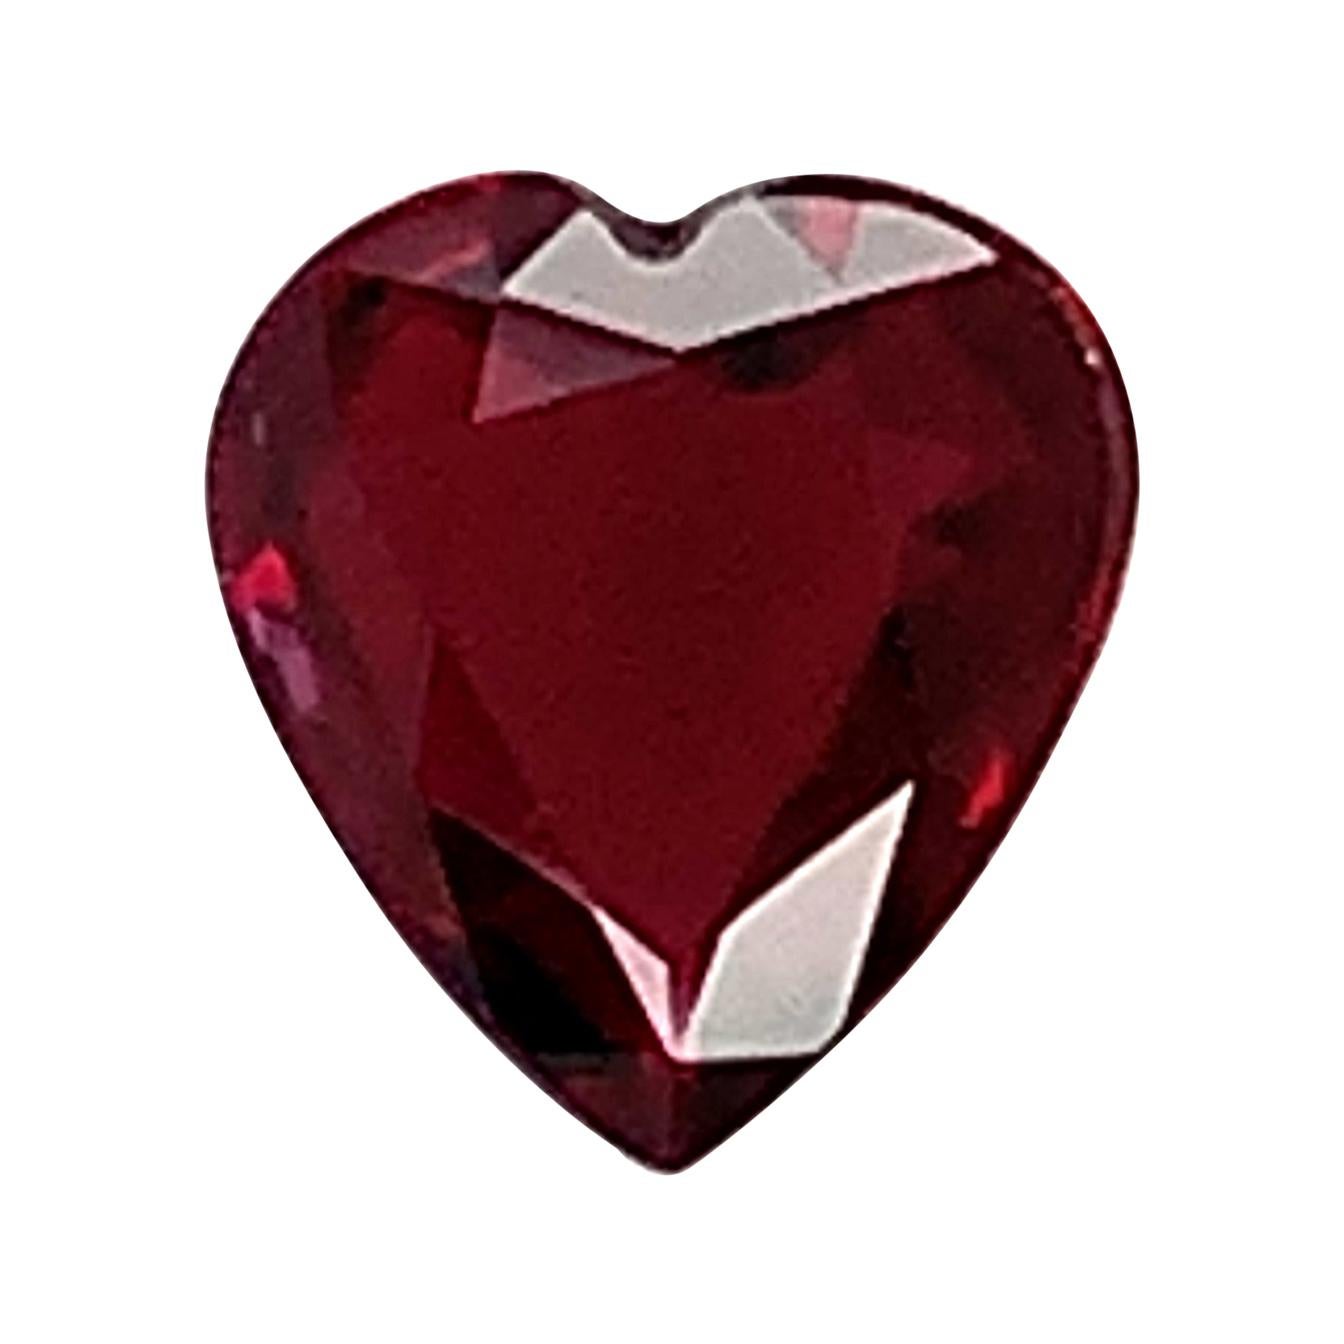 2.00 Carat Heart Shaped Ruby, Unset Loose Gemstone, GIA Certified